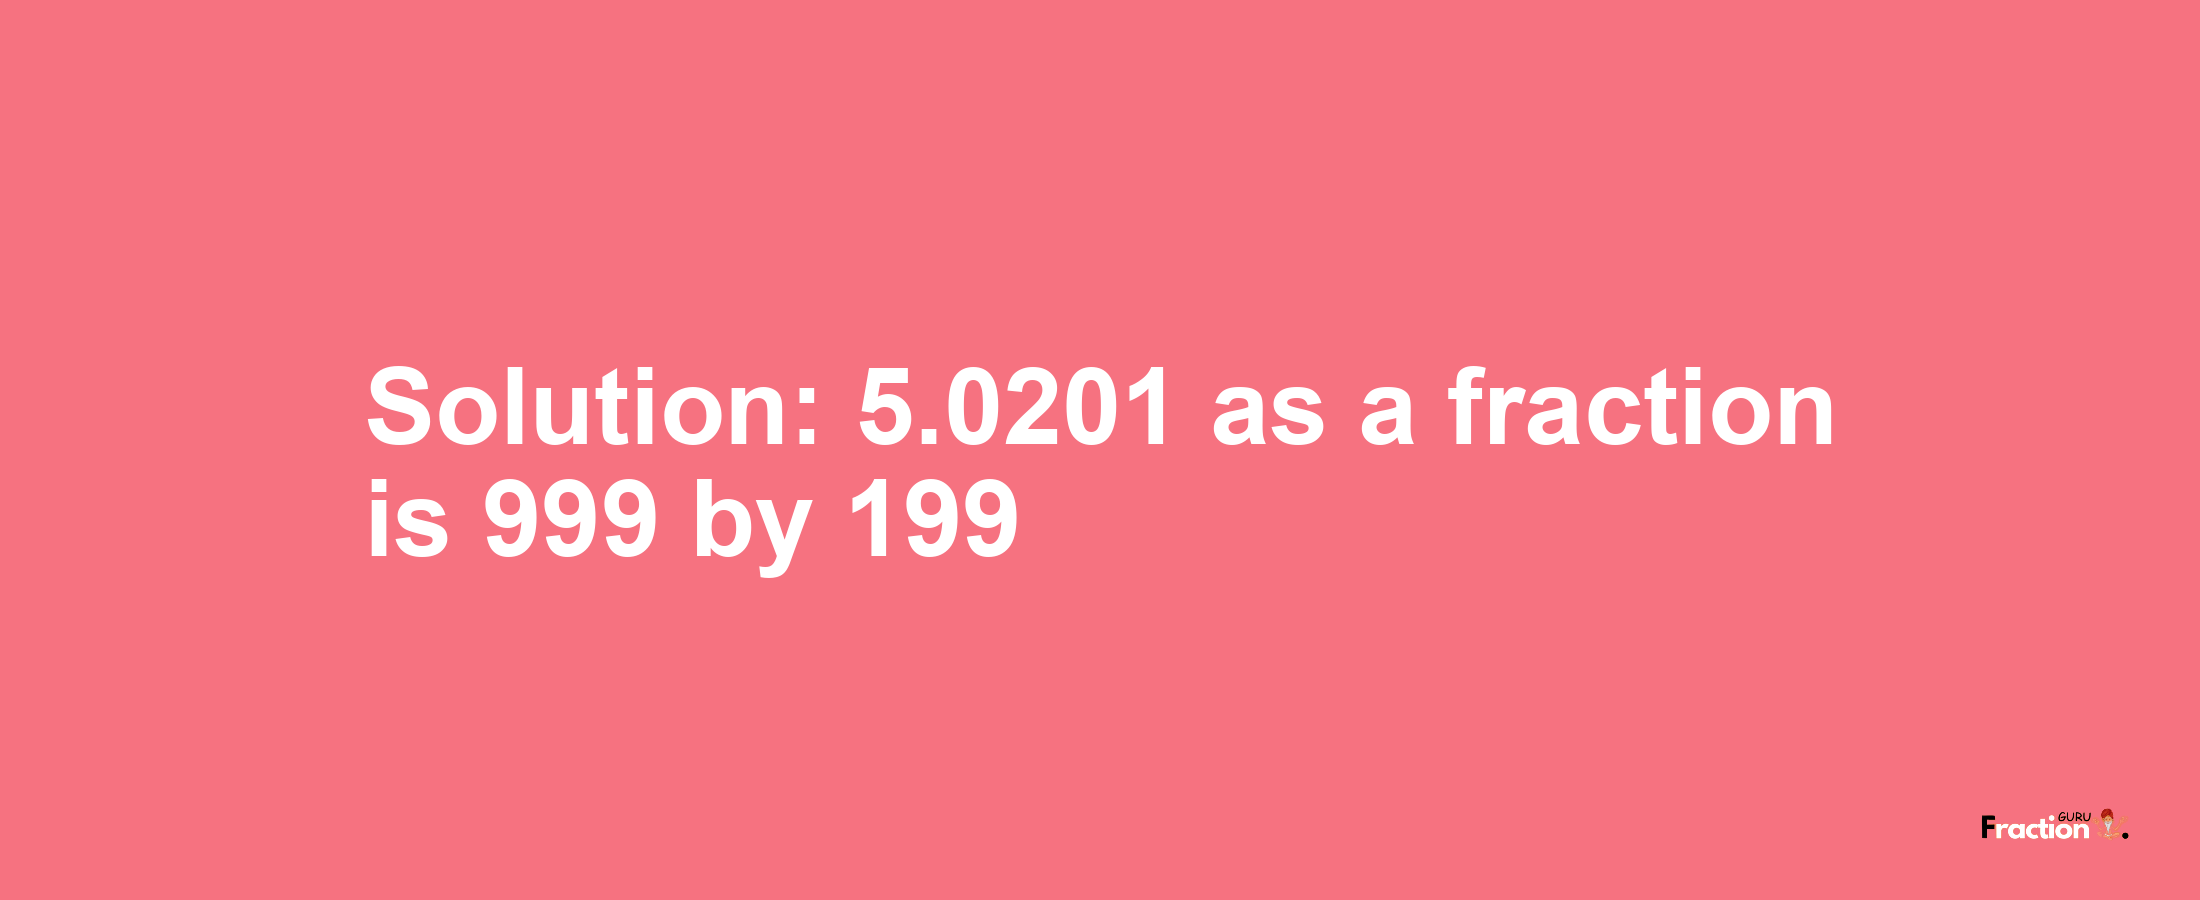 Solution:5.0201 as a fraction is 999/199